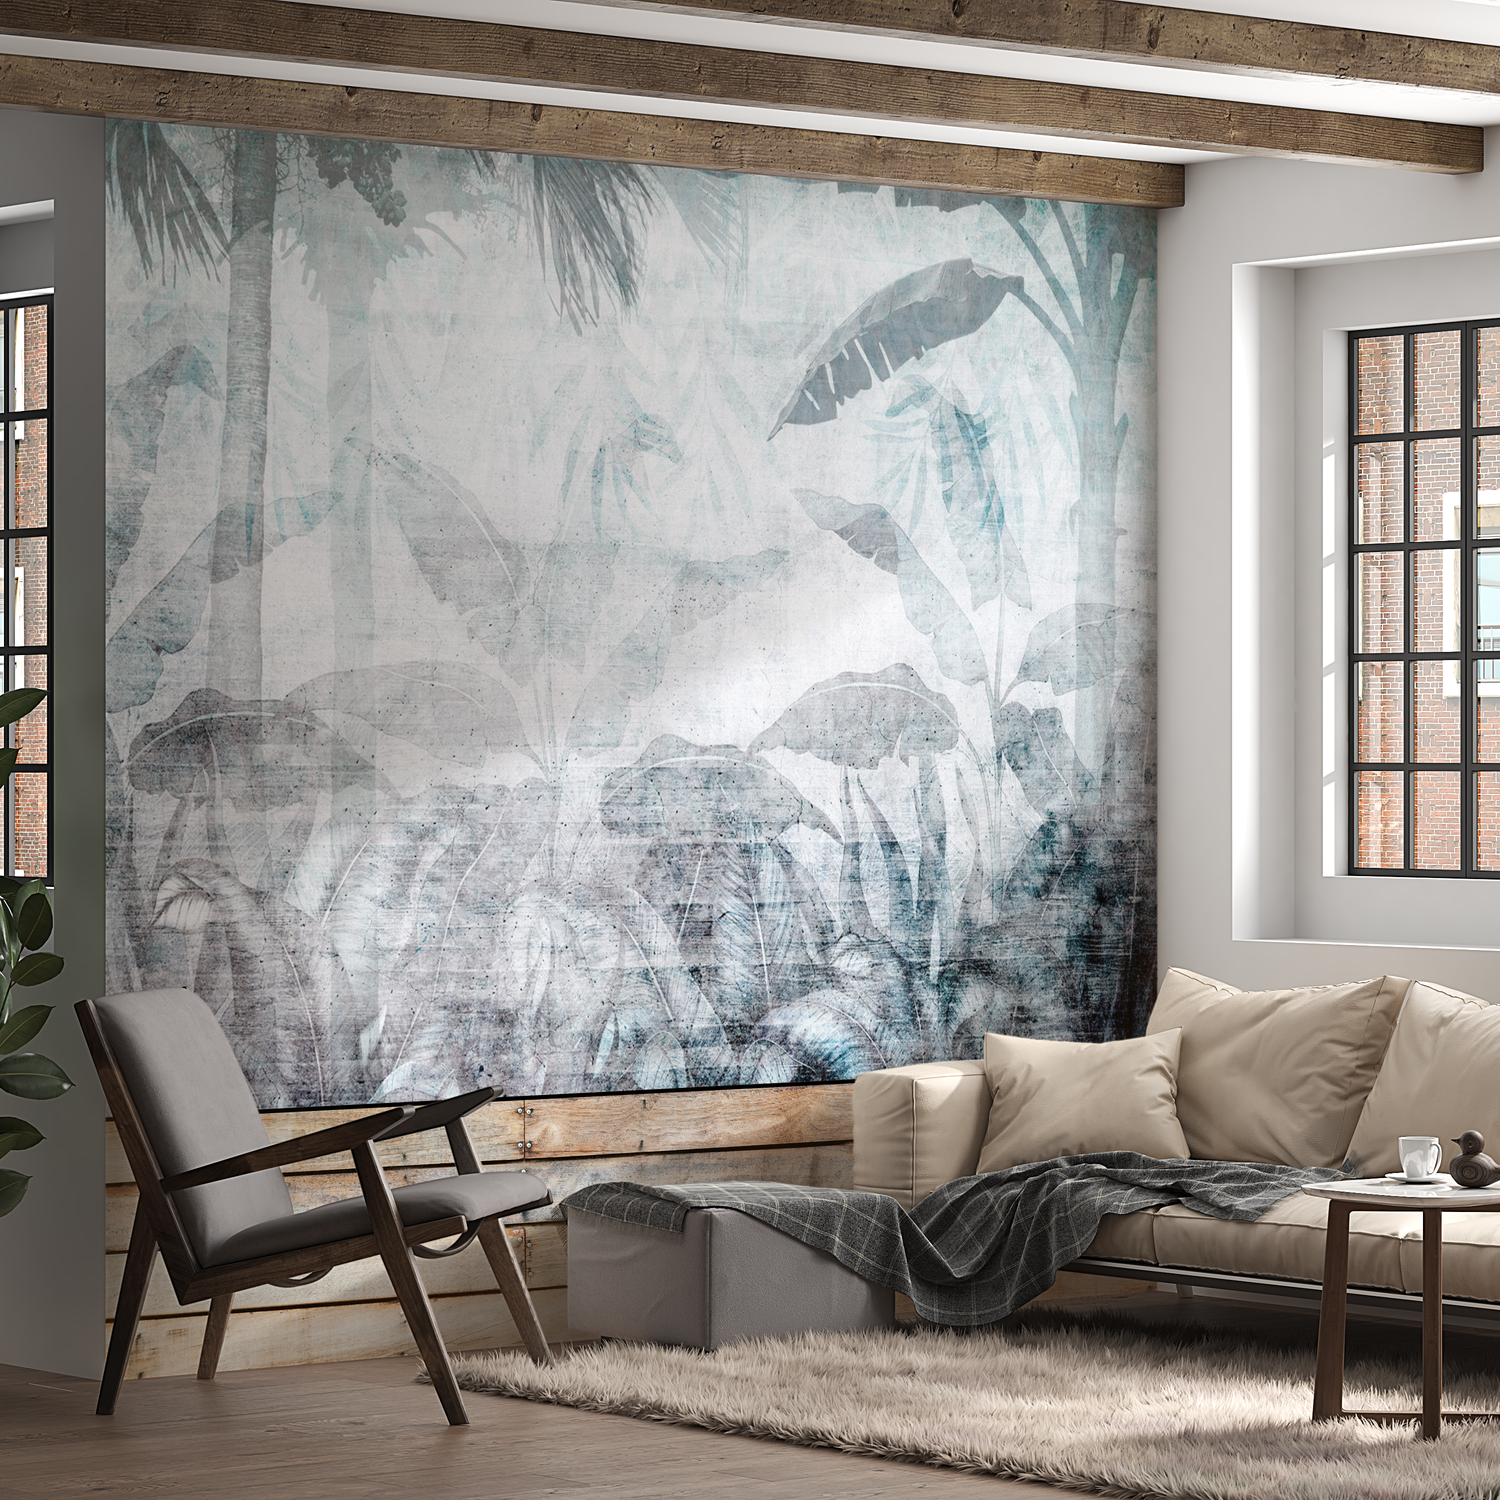 Peel & Stick Botanical Wall Mural - Faded Jungle - Removable Wallpaper 38"Wx27"H